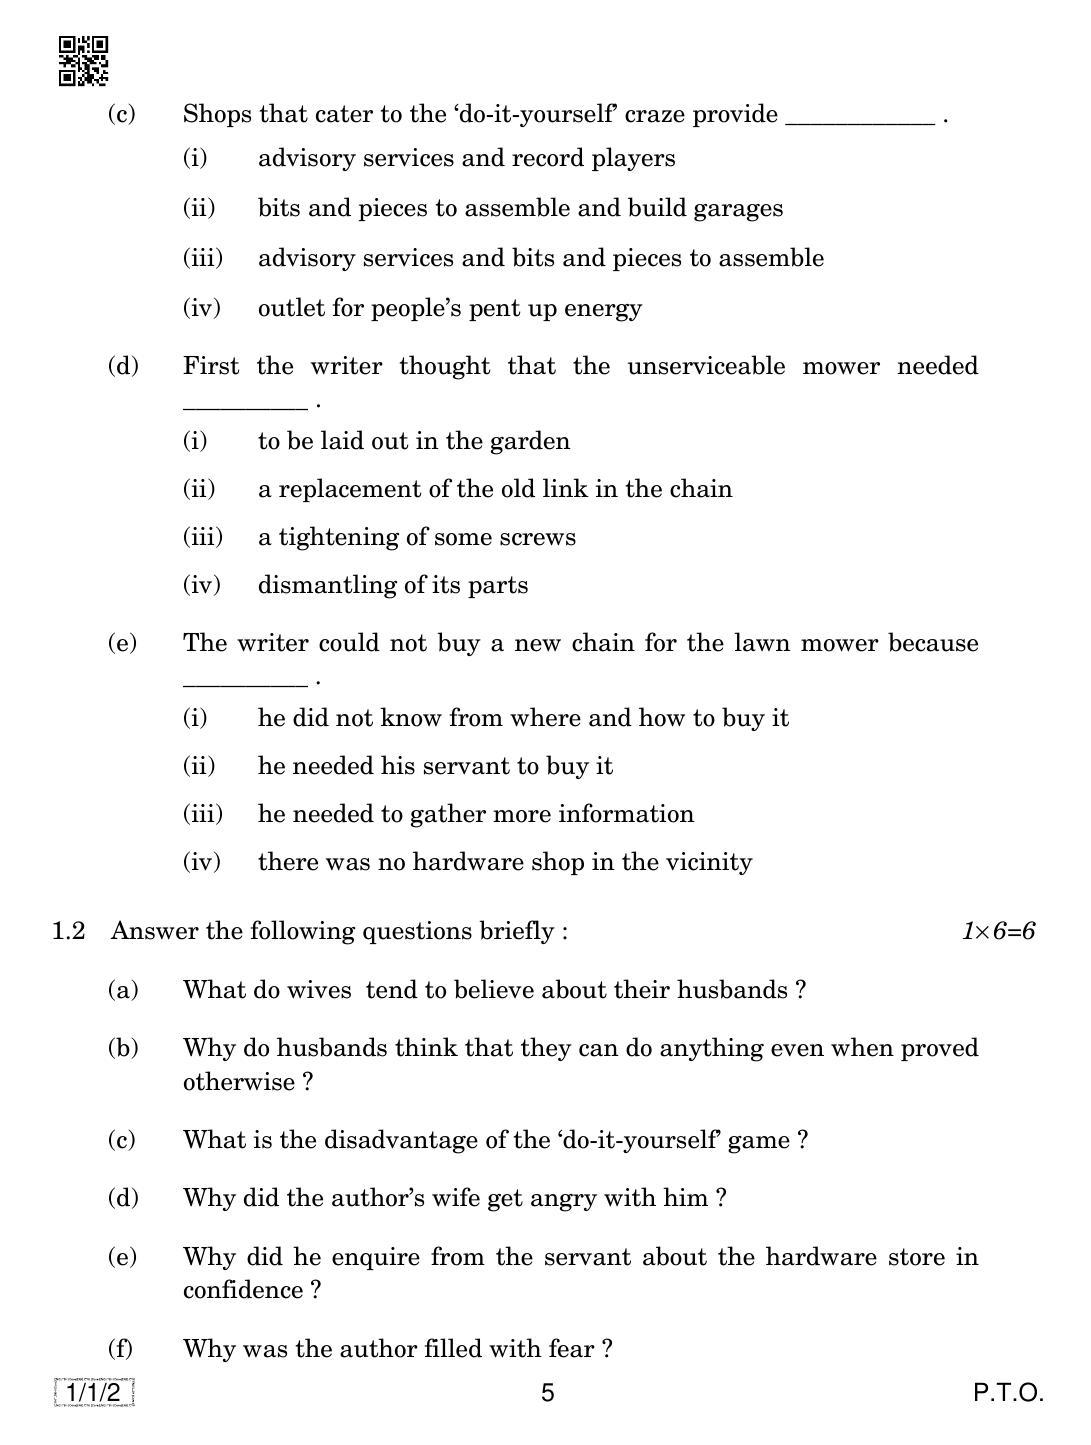 CBSE Class 12 1-1-2 ENGLISH CORE 2019 Compartment Question Paper - Page 5